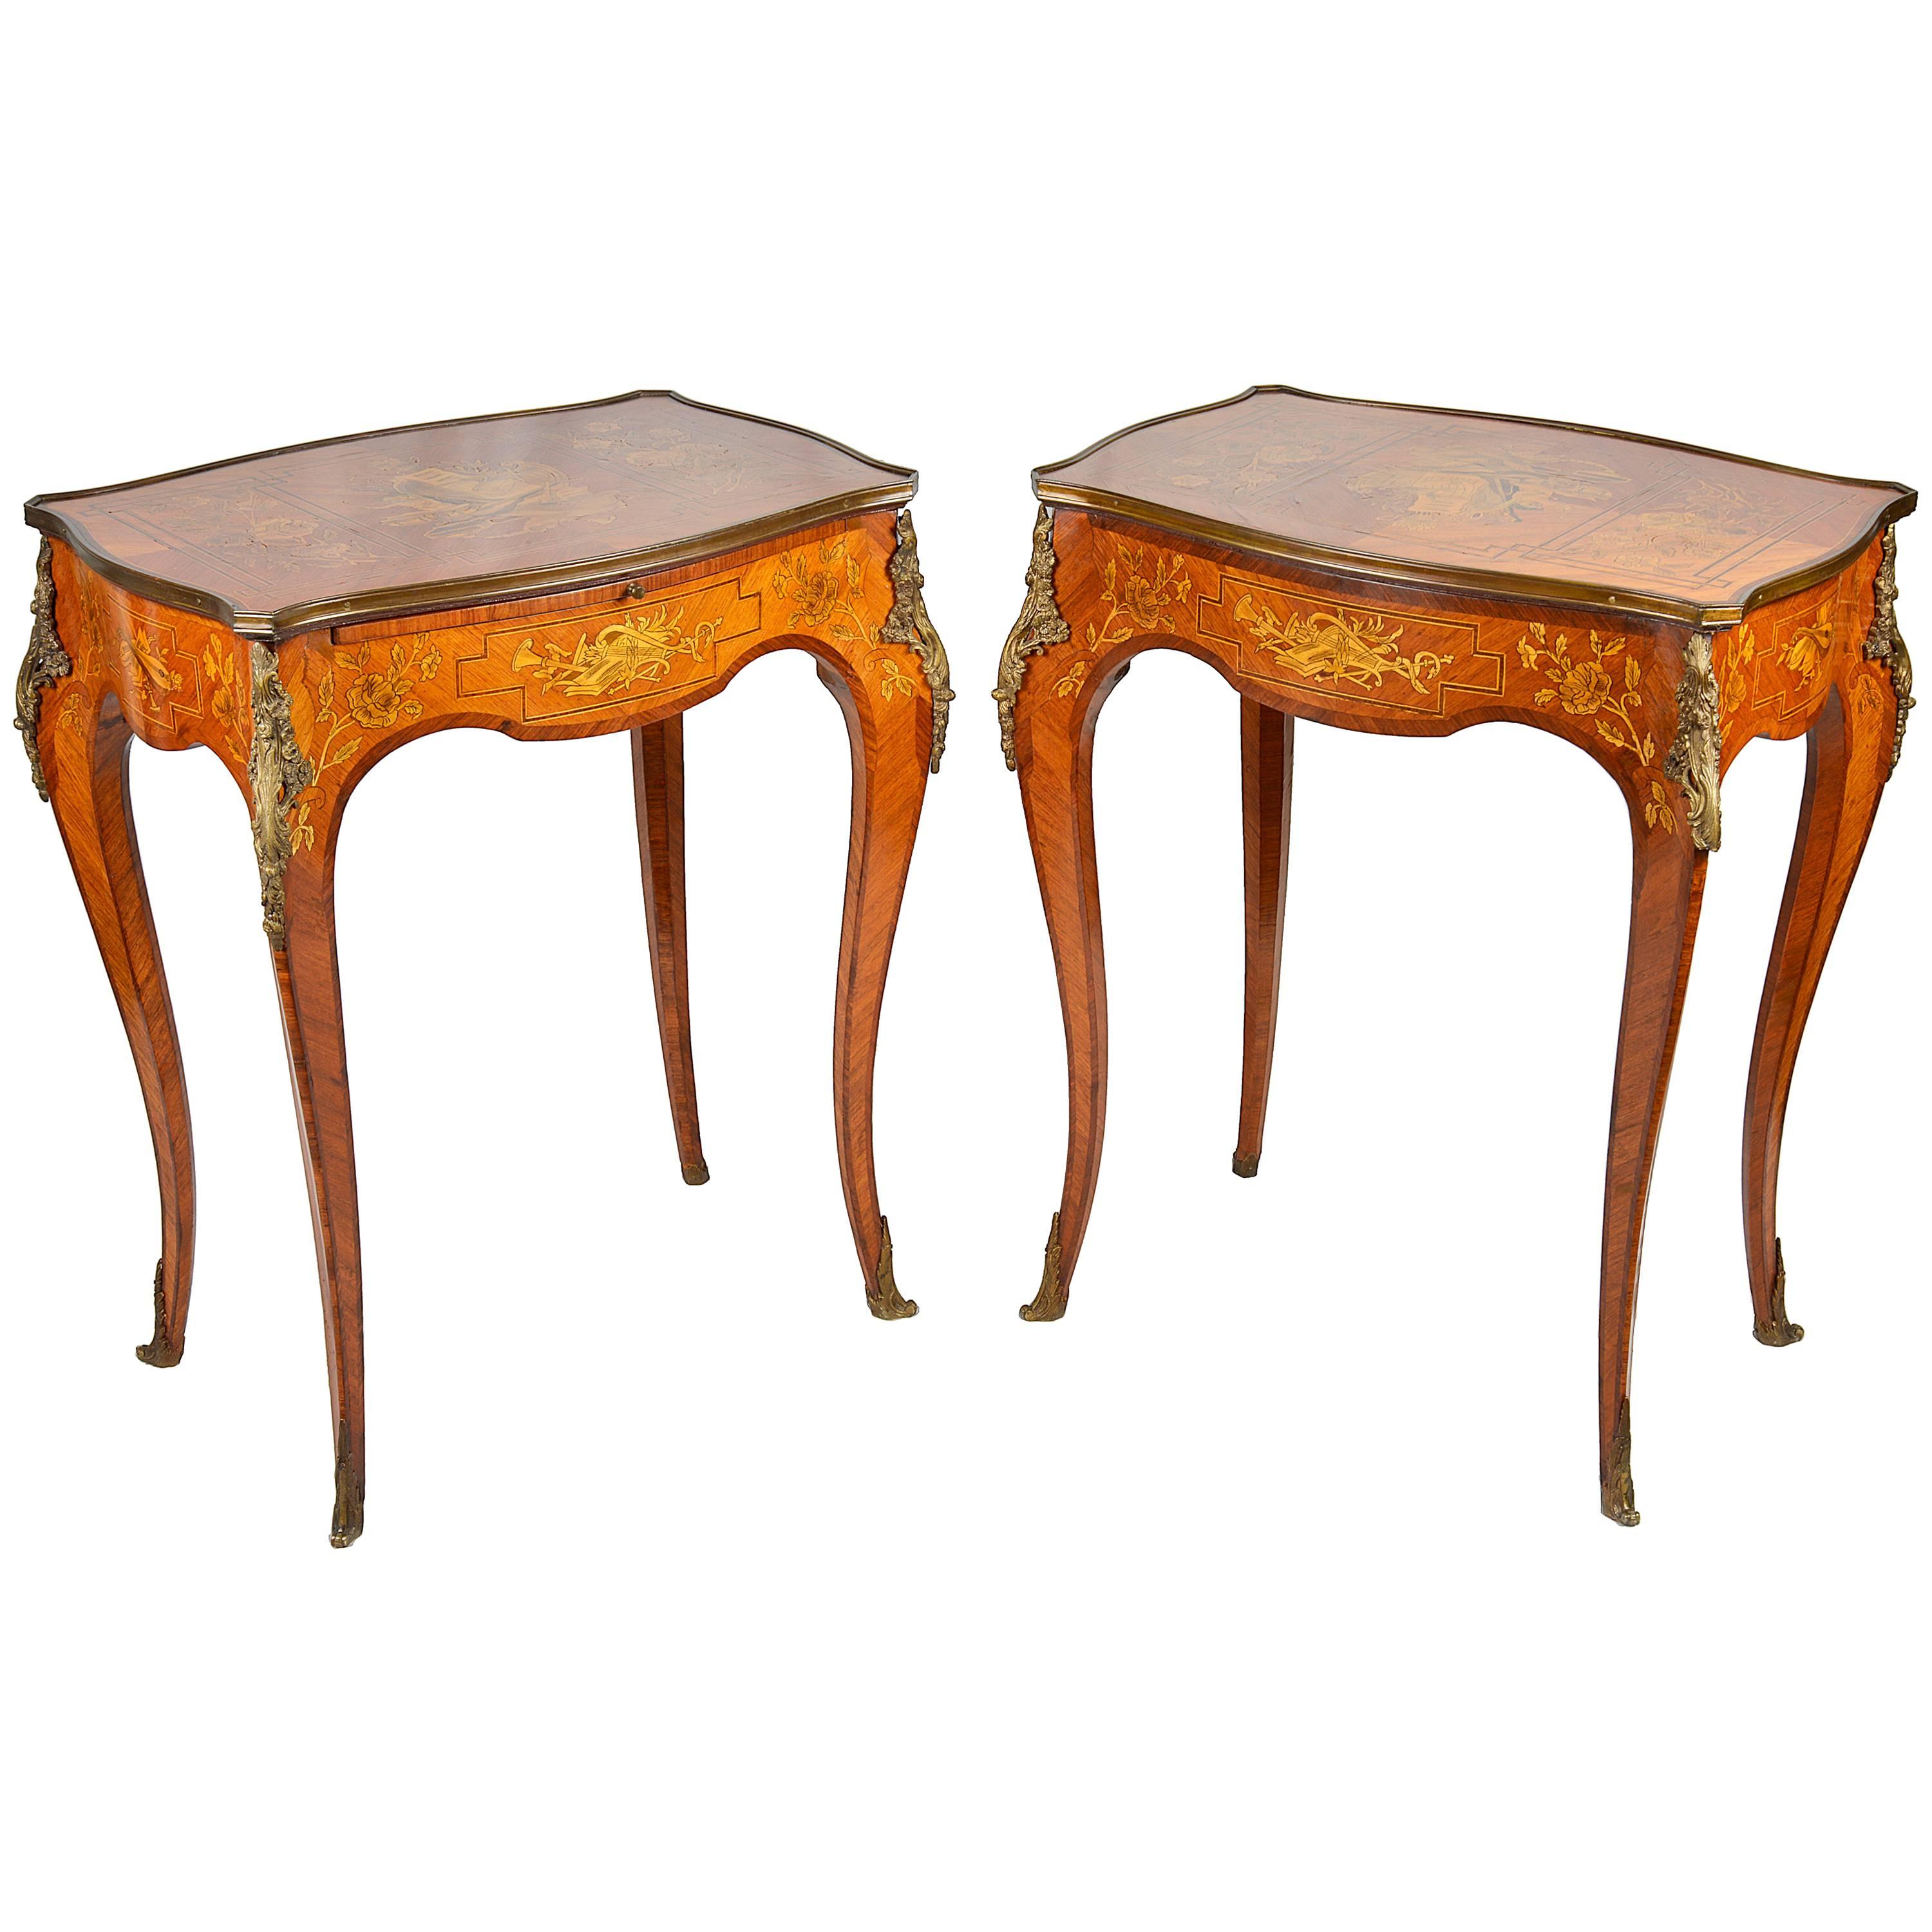 Pair of Louis XVI Style Marquetry Inlaid Side Tables